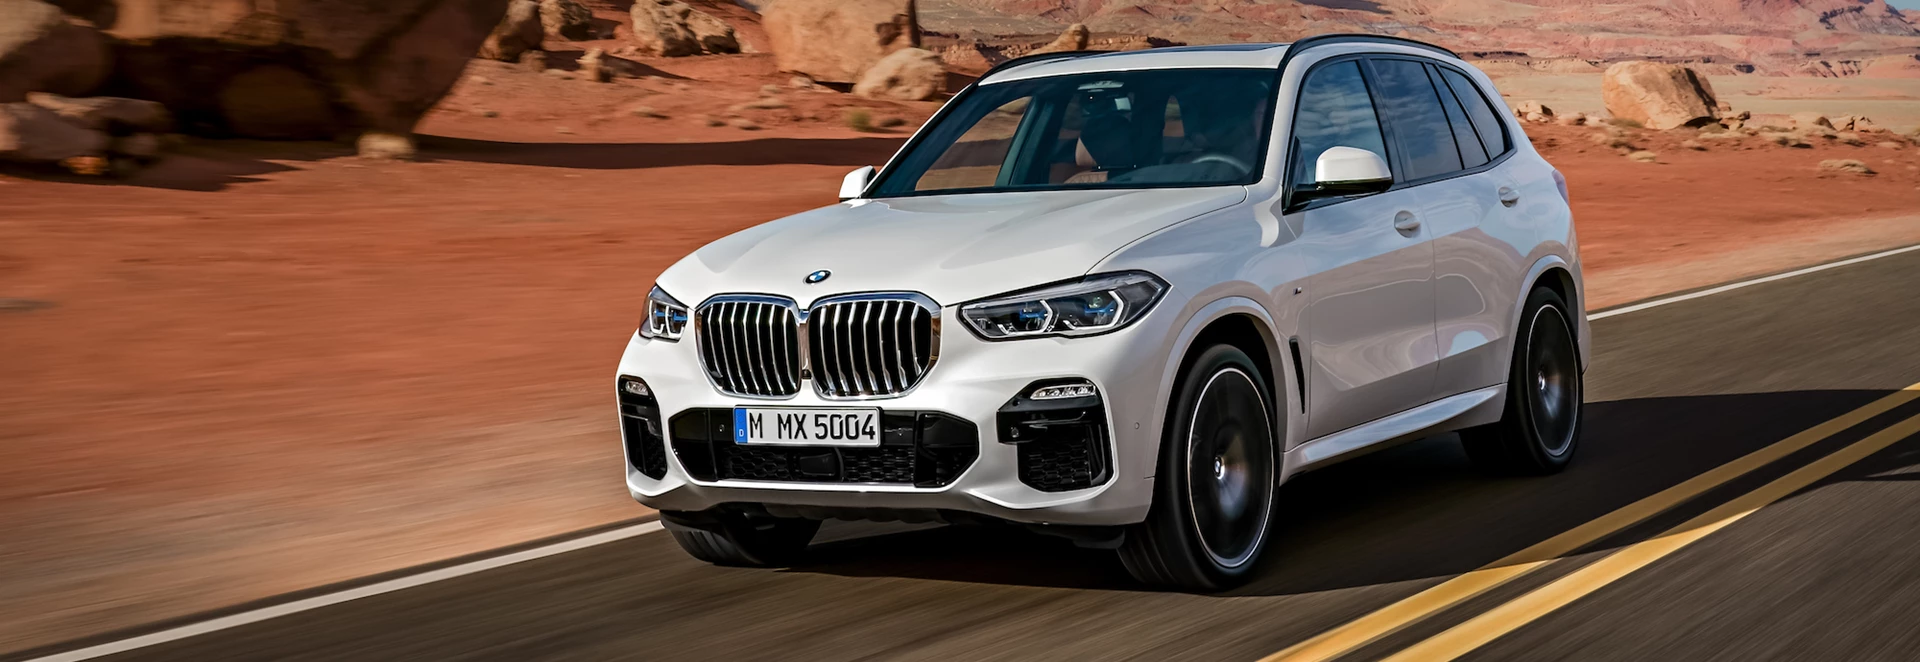 Buyer’s Guide to the BMW X5